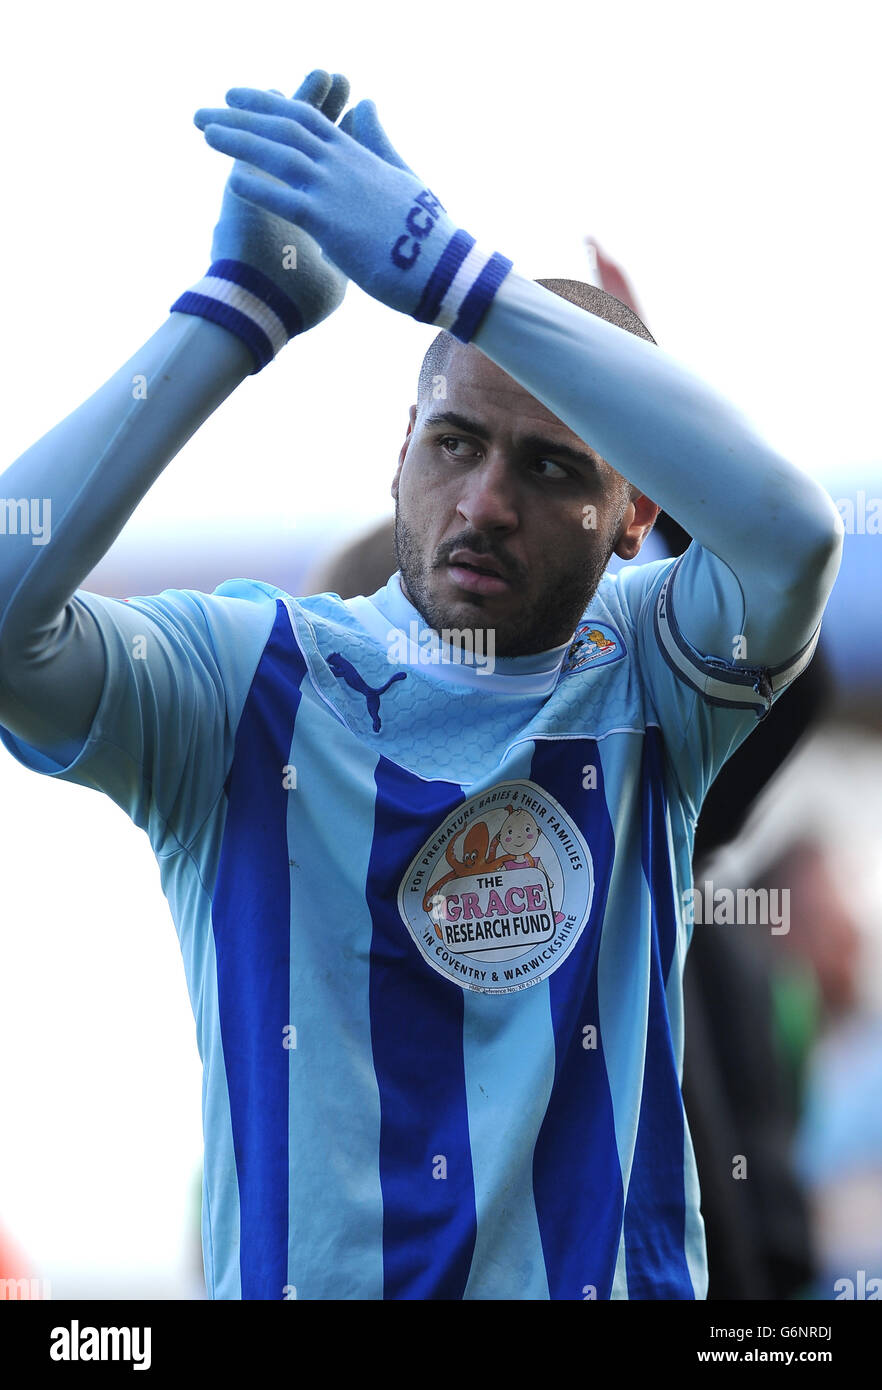 Soccer - Sky Bet League One - Coventry City v Peterborough - Sixfields. Coventry City's Leon Clarke applauds the home fans after the game against Peterborough United. Photo: Nigel French Stock Photo